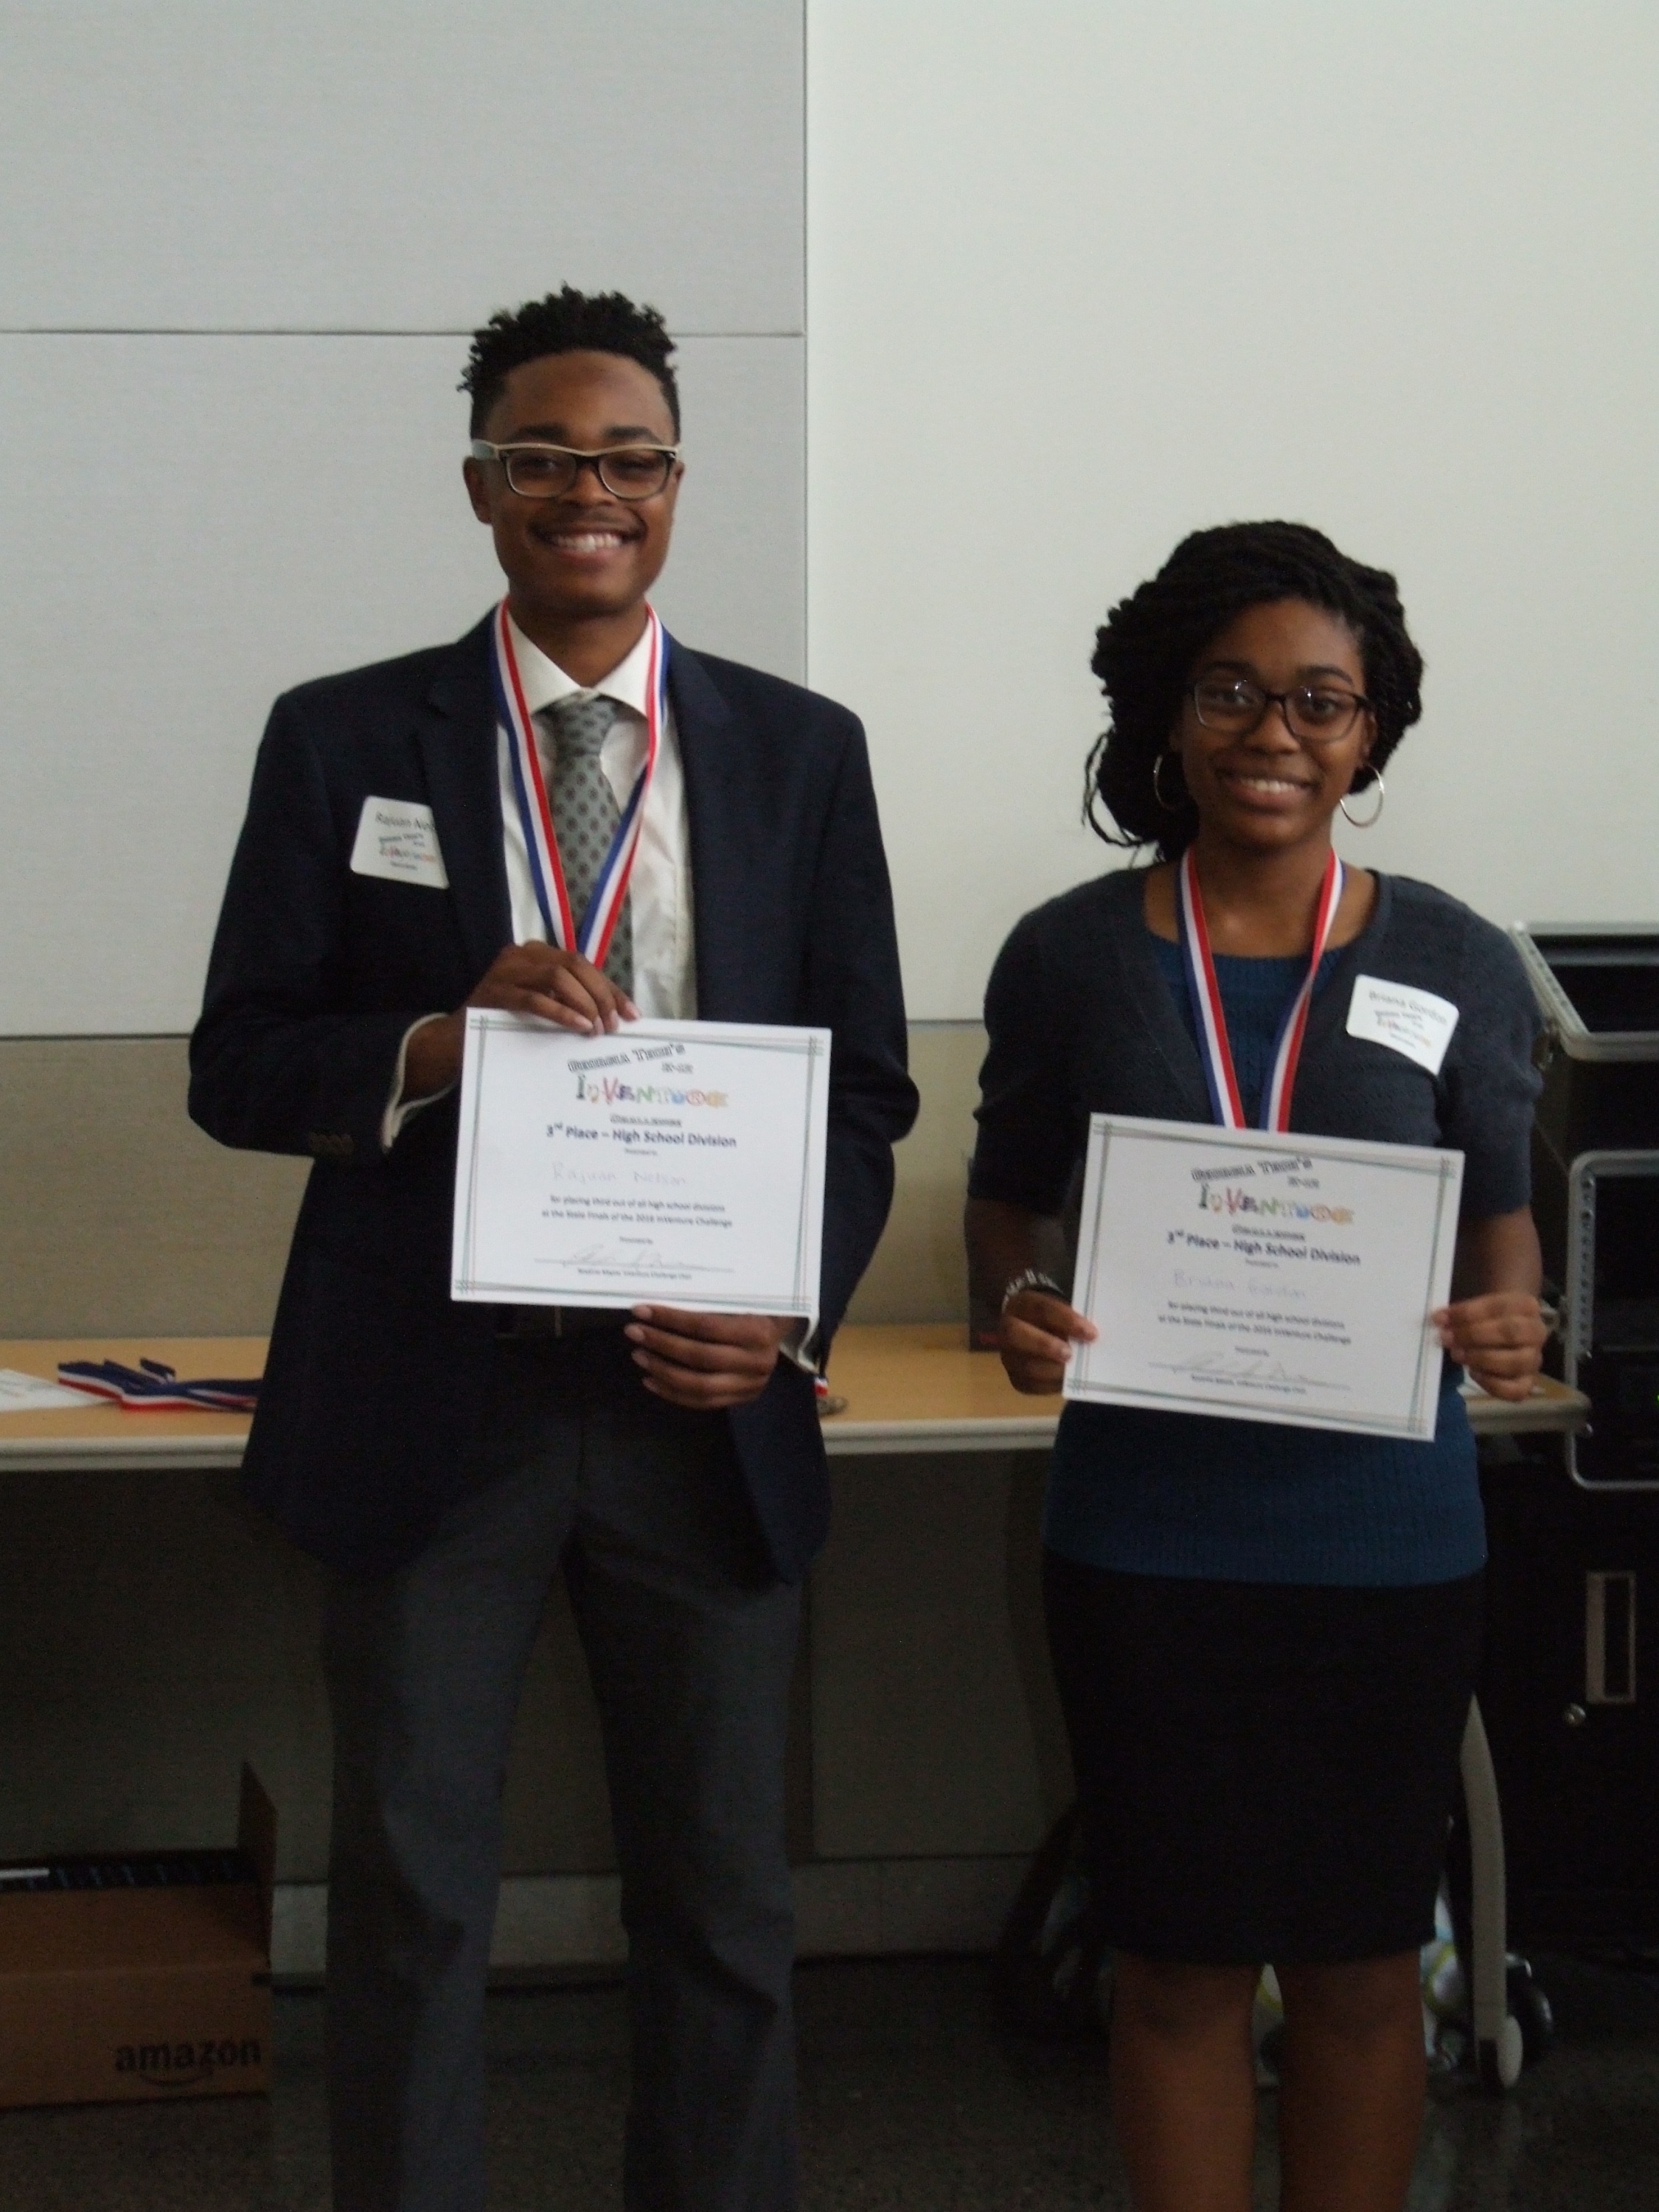 3rd Place High School Award:Team: ReVitalize School: Rockdale Magnet School for Science and Technology Students: Briana Gordon and Rajuan Nelson